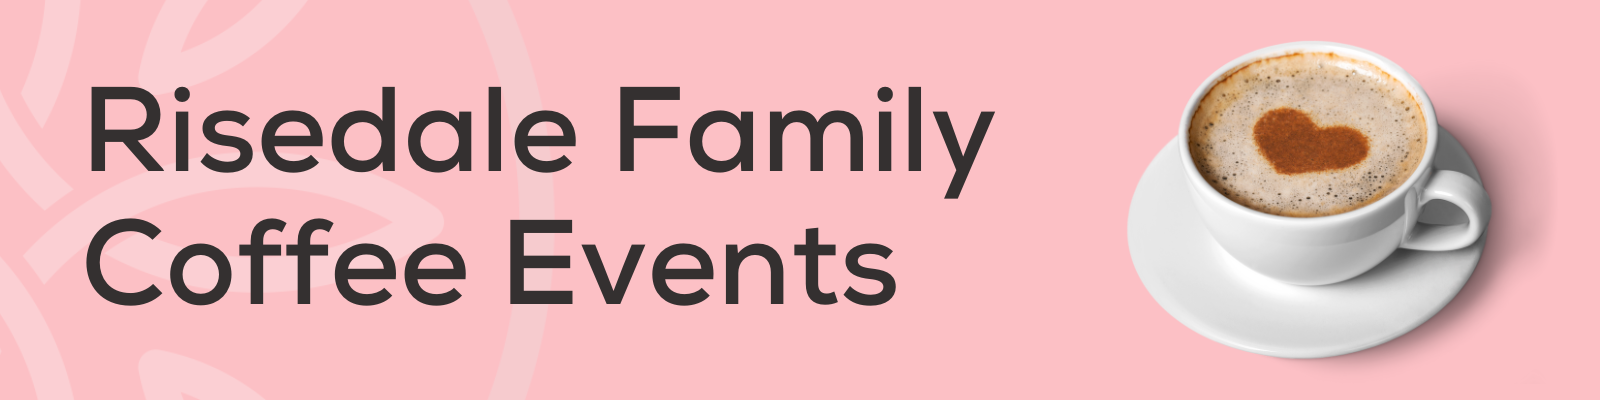 Risedale Family Coffee Events General Banner V2